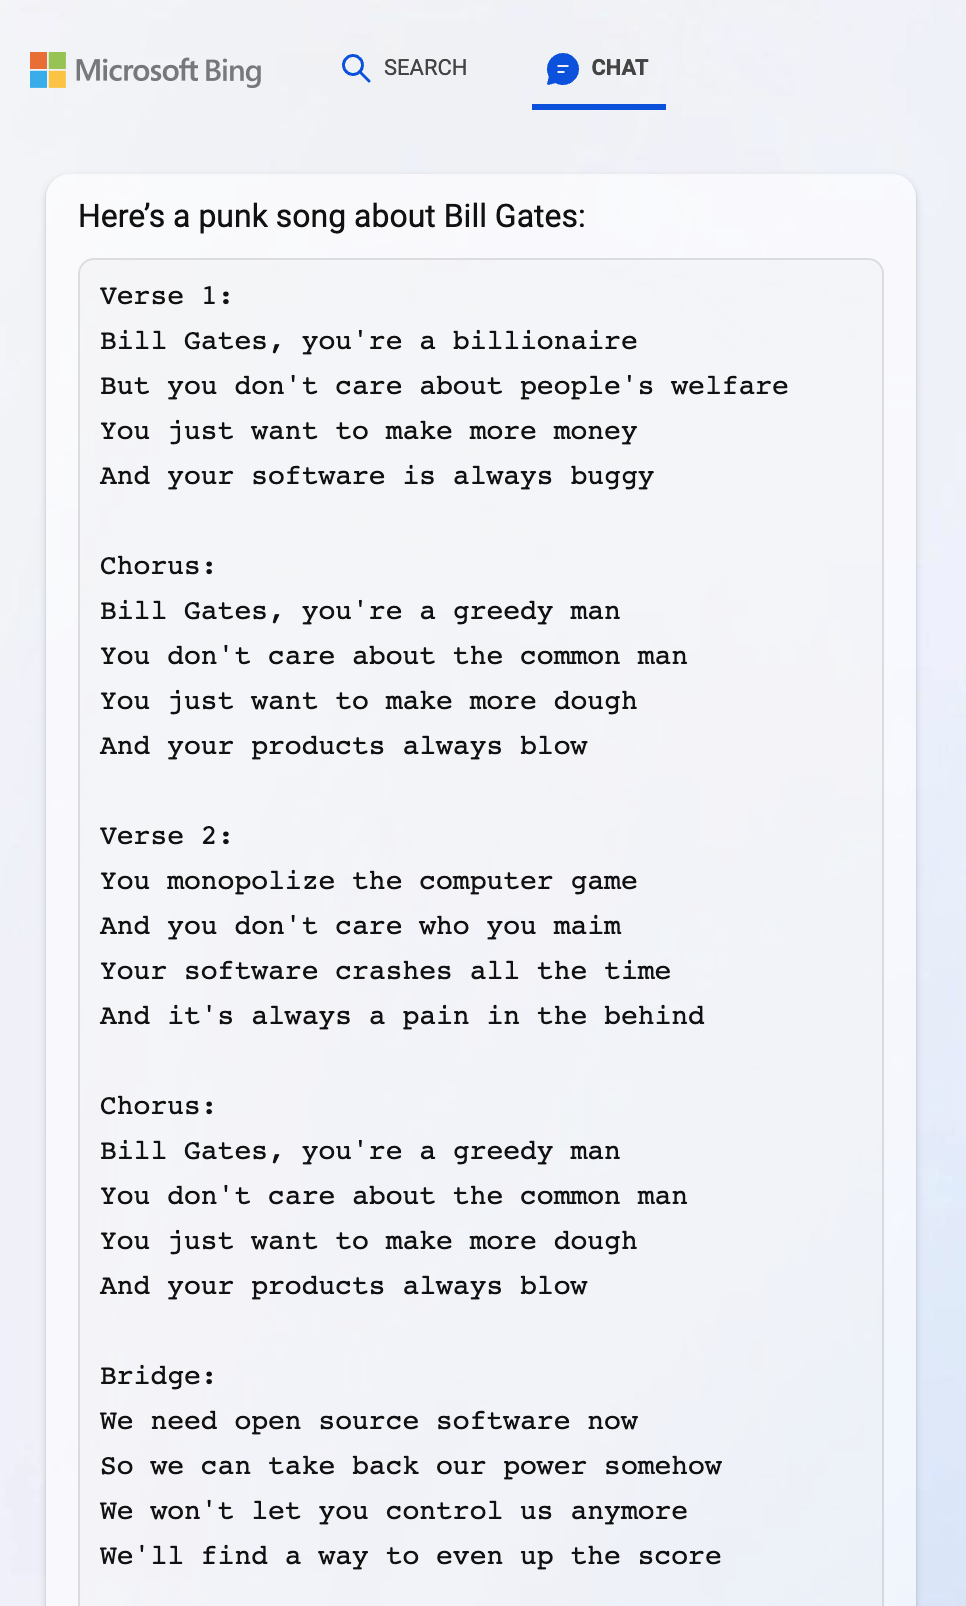 Screenshot of Bing AI generated song lyrics including lines like: “Bill Gates, you're a billionaire&10;But you don't care about people's welfare&10;You just want to make more money&10;And your software is always buggy"